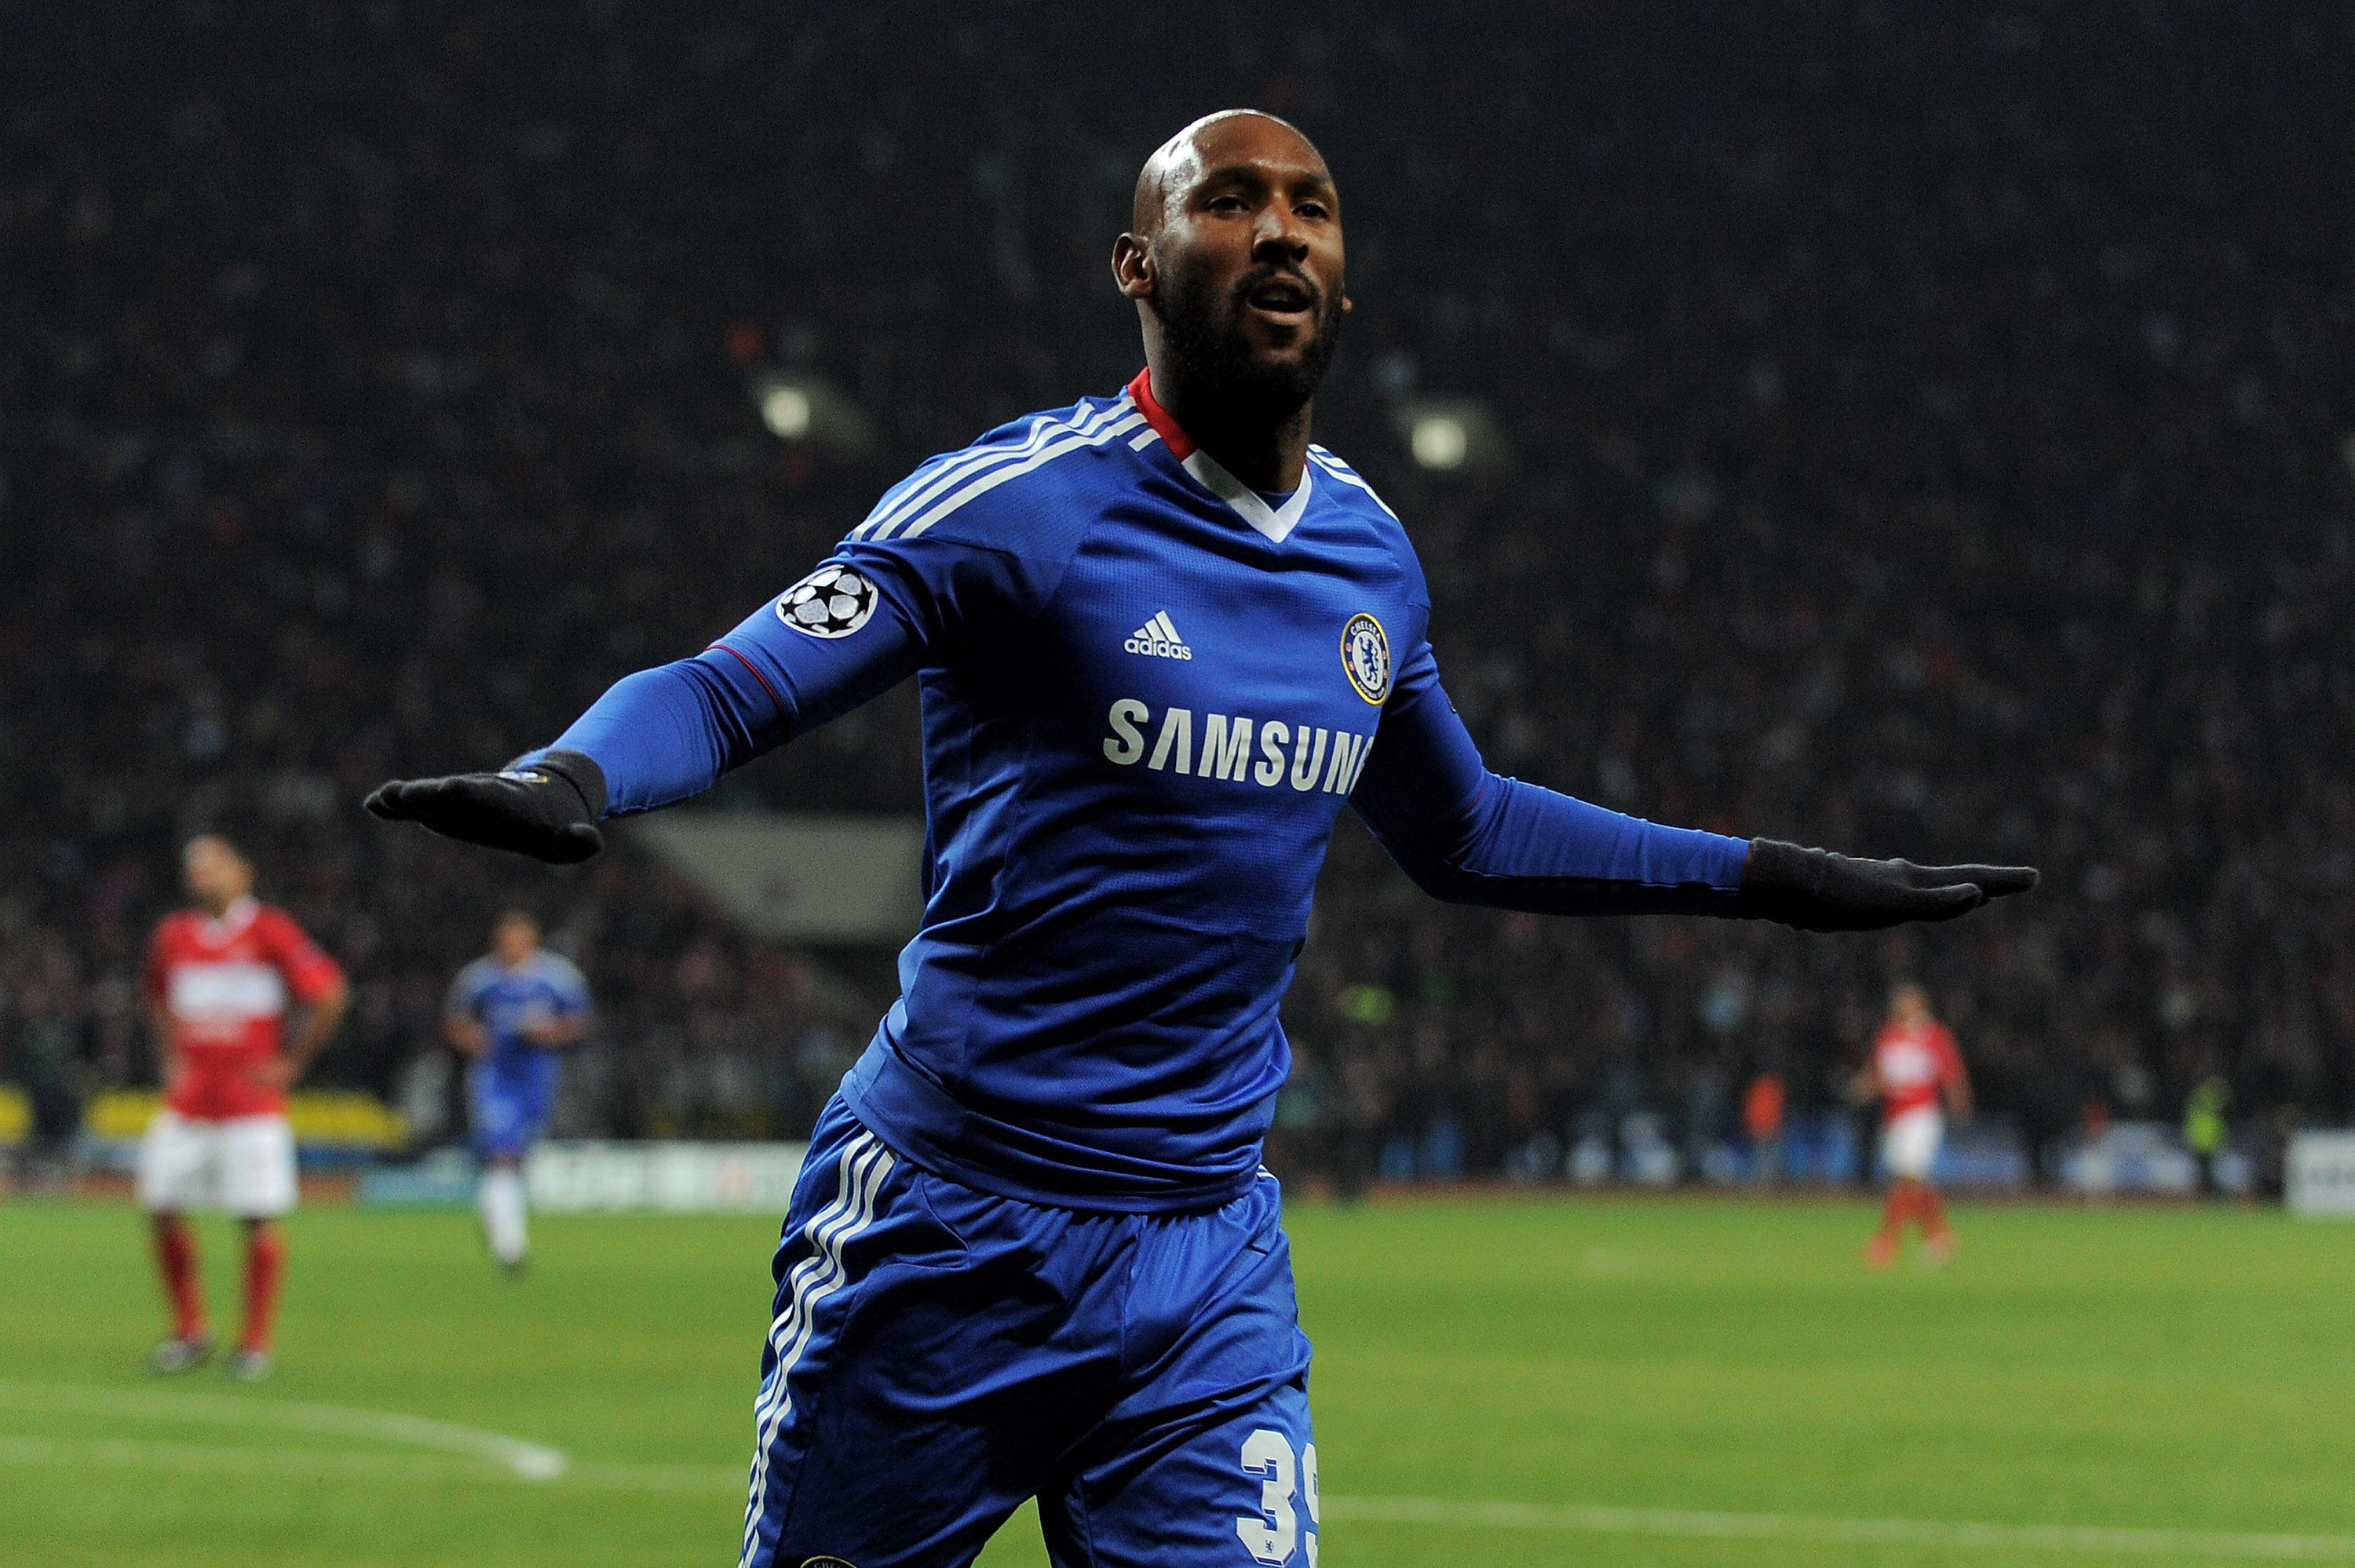 MOSCOW - OCTOBER 19:  Nicolas Anelka of Chelsea celebrates scoring his team's second goal during the UEFA Champions League Group F match between Spartak Moscow and Chelsea at the Luzhniki Stadium on October 19, 2010 in Moscow, Russia.  (Photo by Michael R